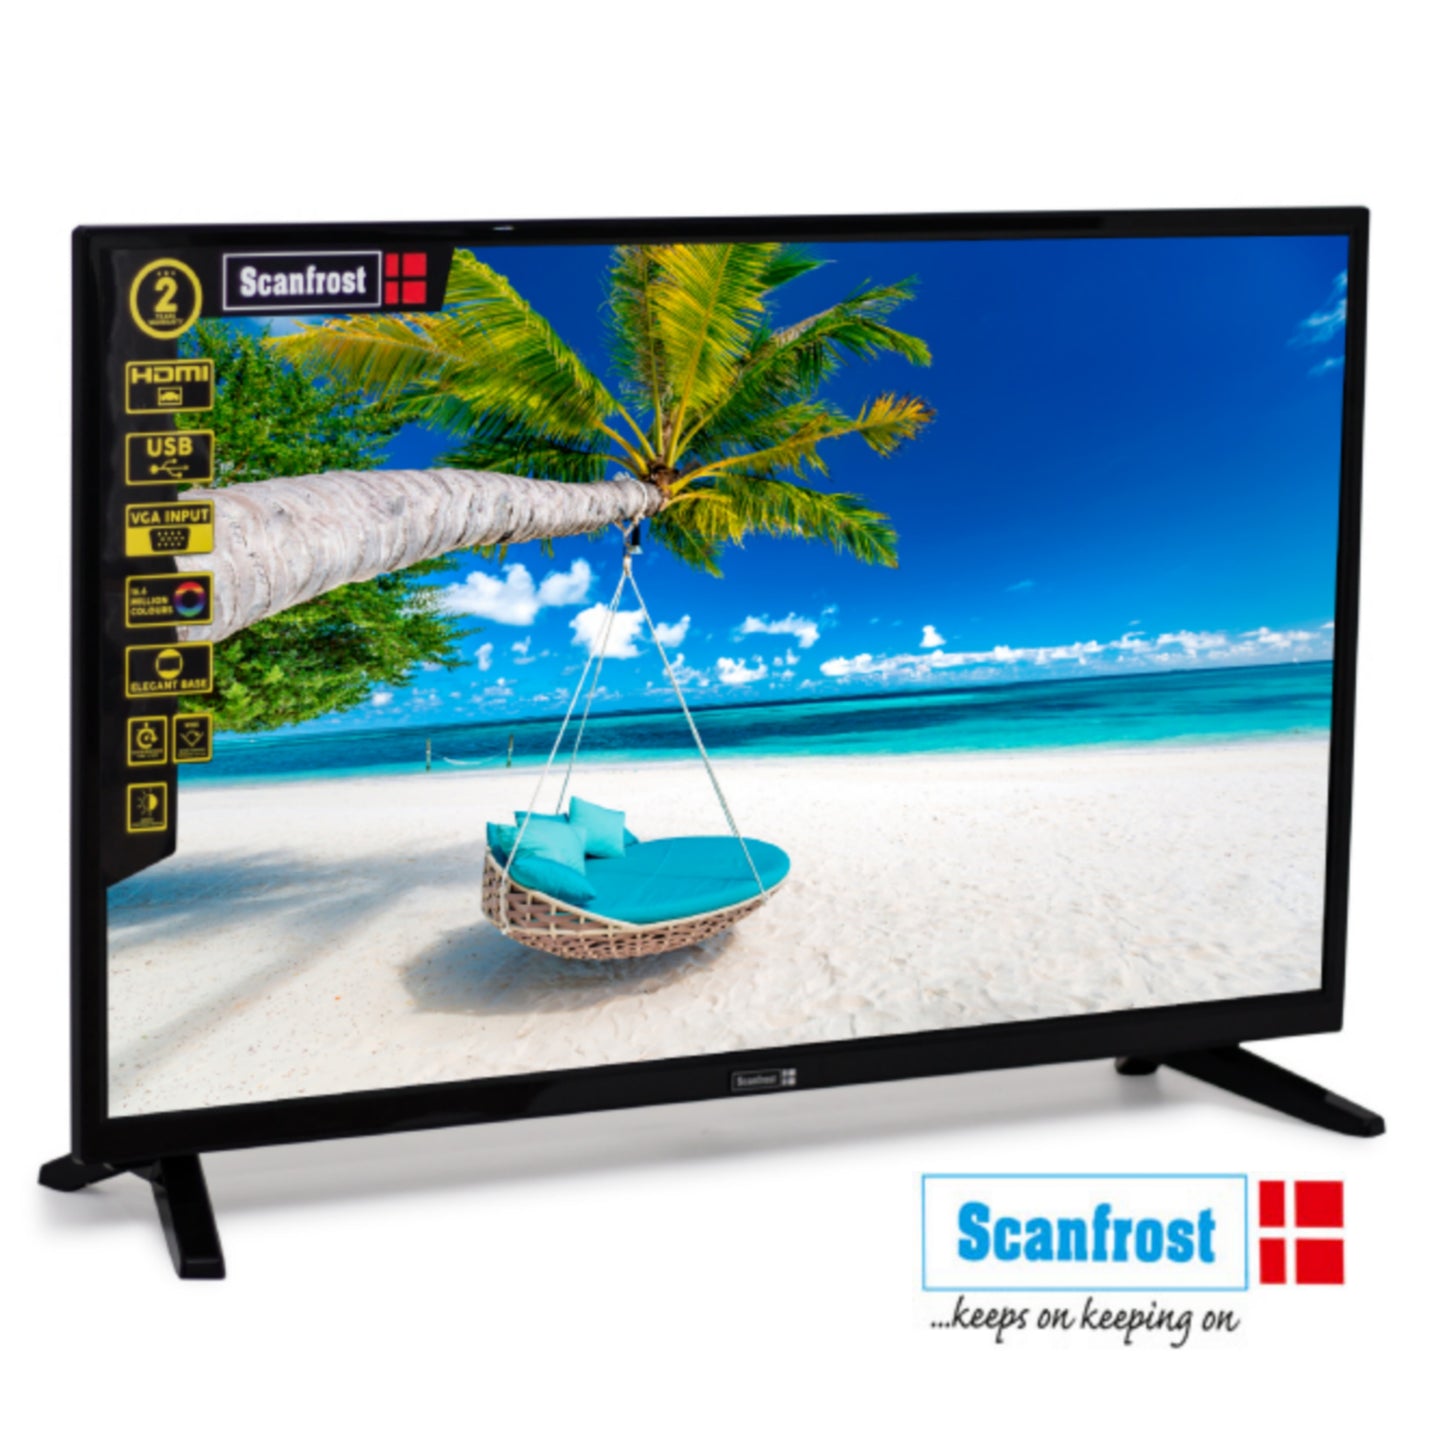 ScanFrost 32 Inch SFLED32EL HD Ready LED TV (Front View) + 2 Years Warranty - Brand New